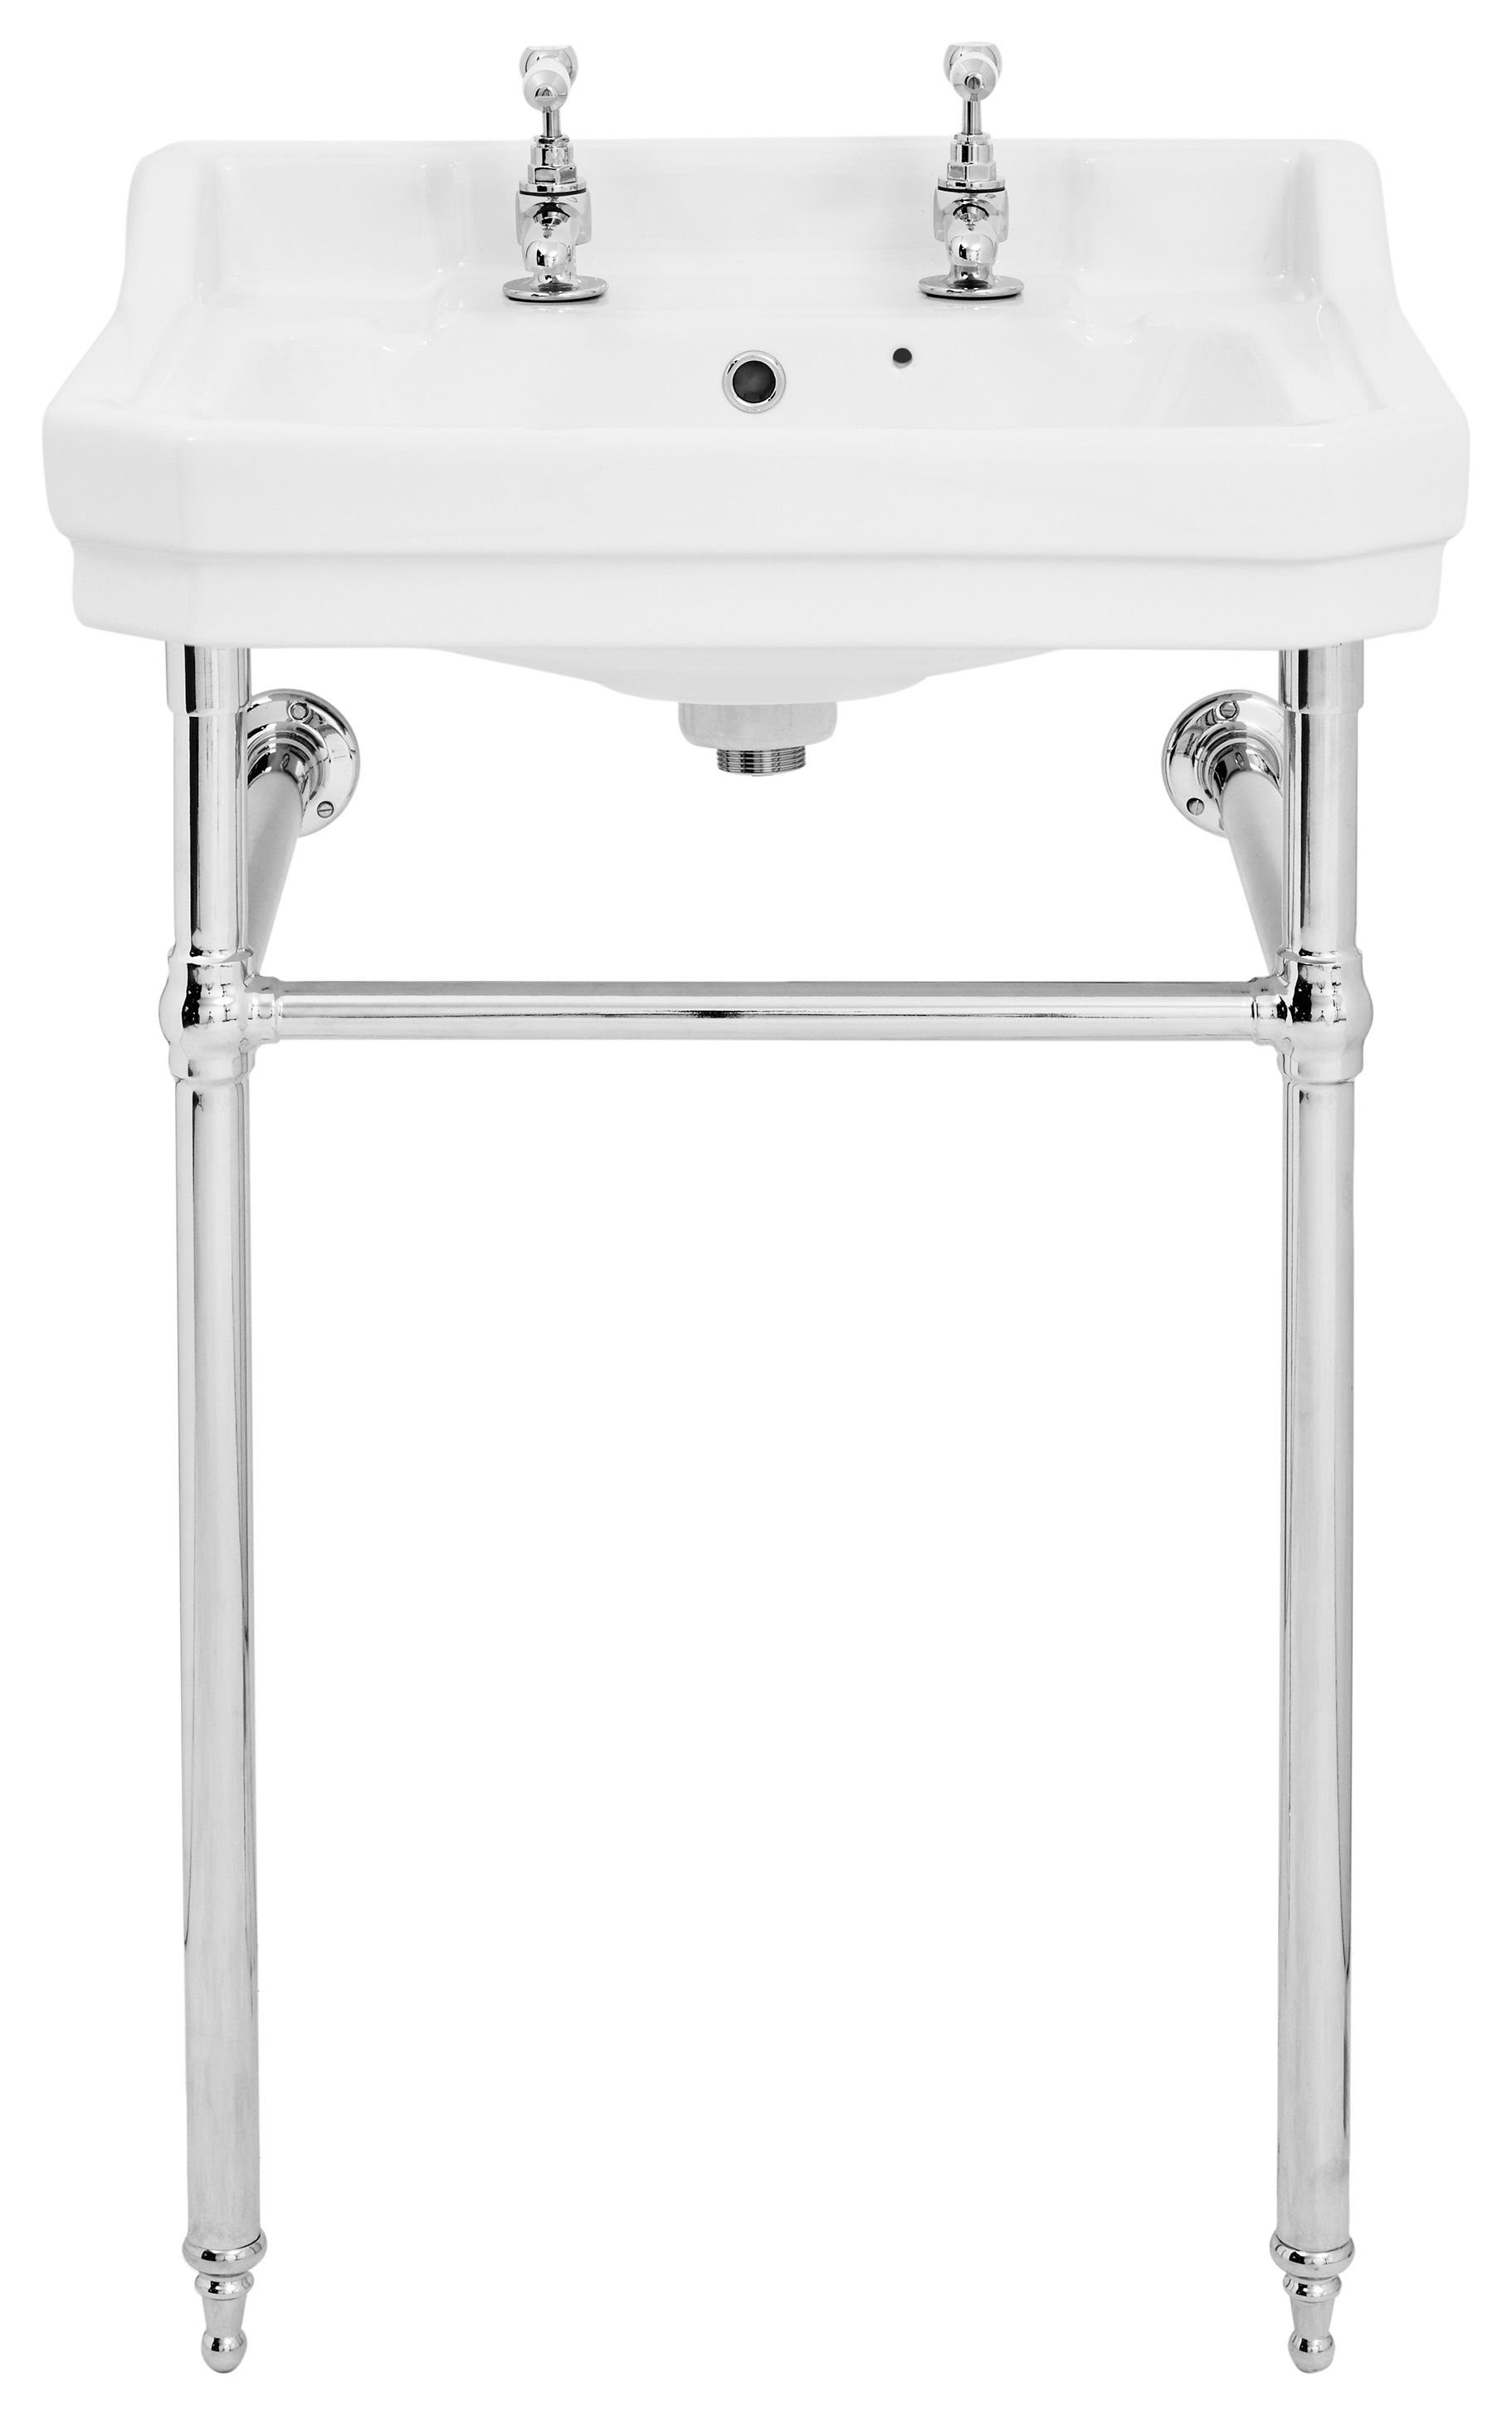 Image of Wickes Oxford Traditional 2 Tap Hole Ceramic Bathroom Basin with Chrome Washstand - 610mm